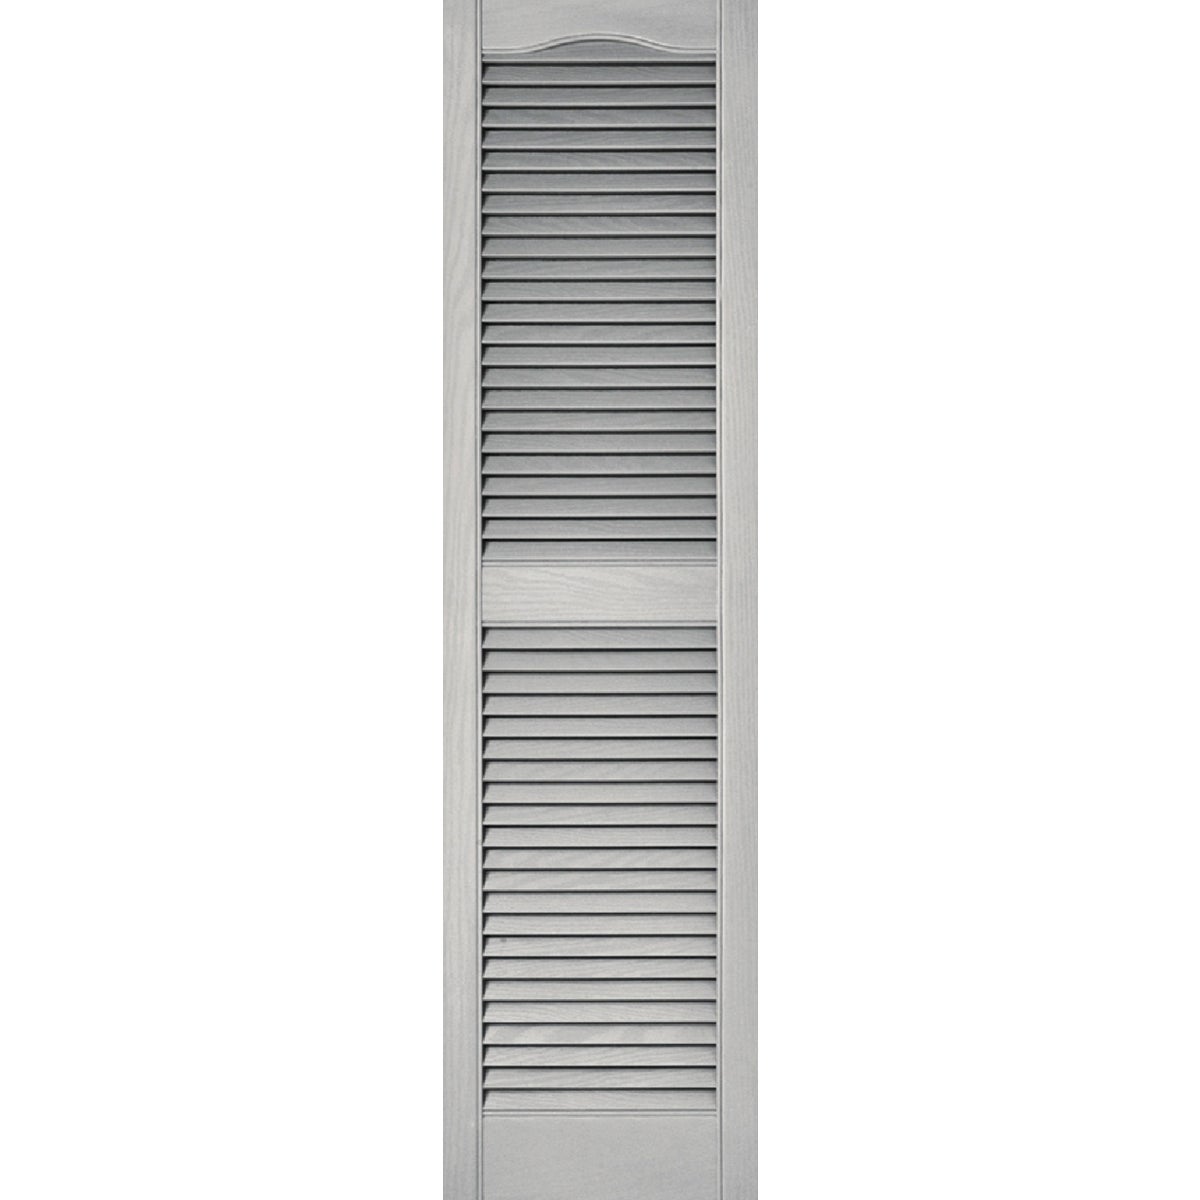 Item 165204, All shutters open louvered cathedral top with center rail and 15" wide .